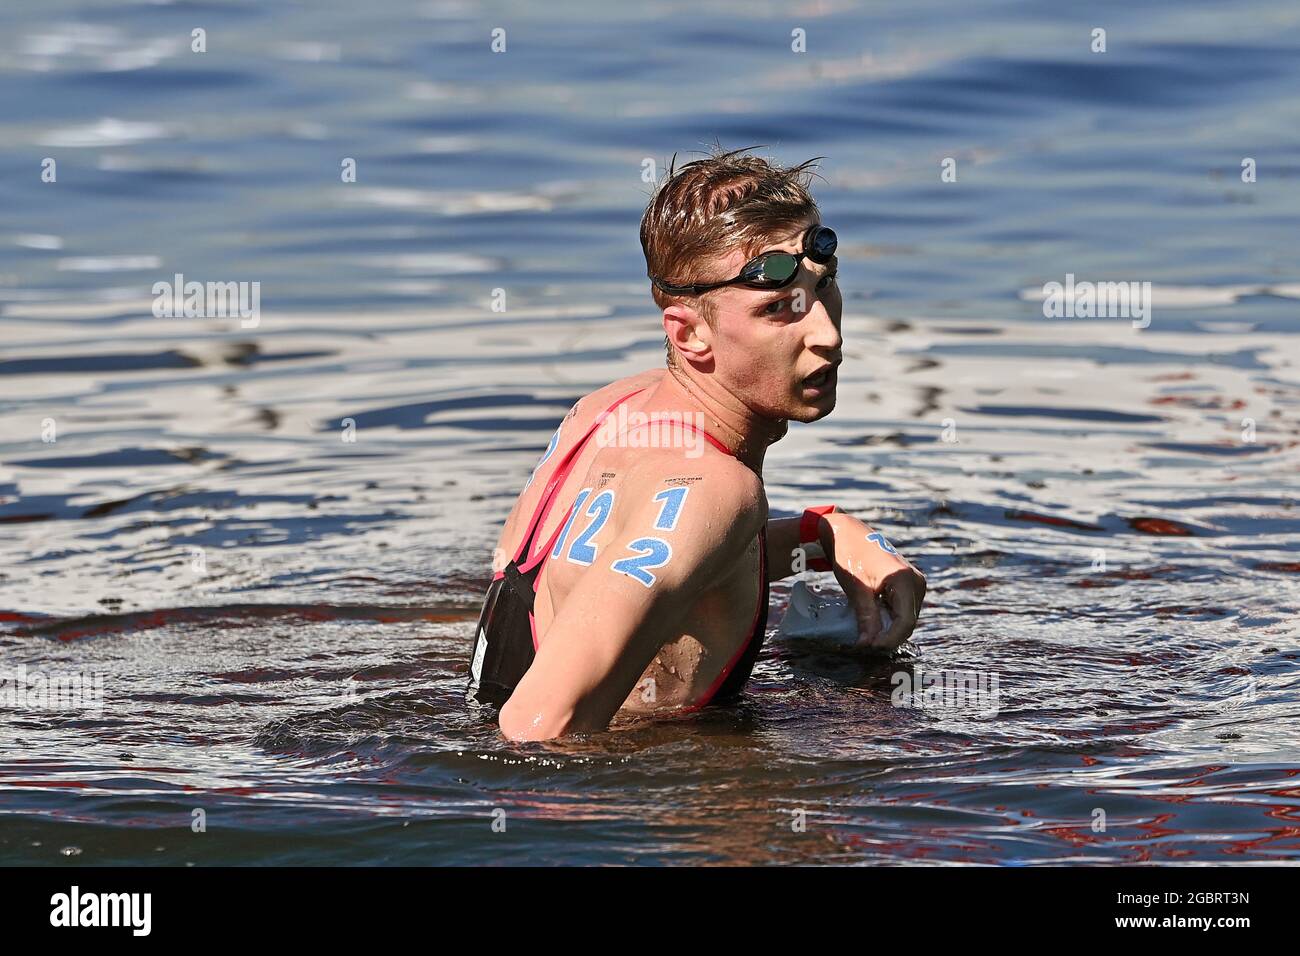 Florian WELLBROCK (GER), at the exhaustion winner winner, champion swimming, open water, long distance swimming, marathon Swimming Men`s 10 km on August 5th, 2021, Marine Park. Olympic Summer Games